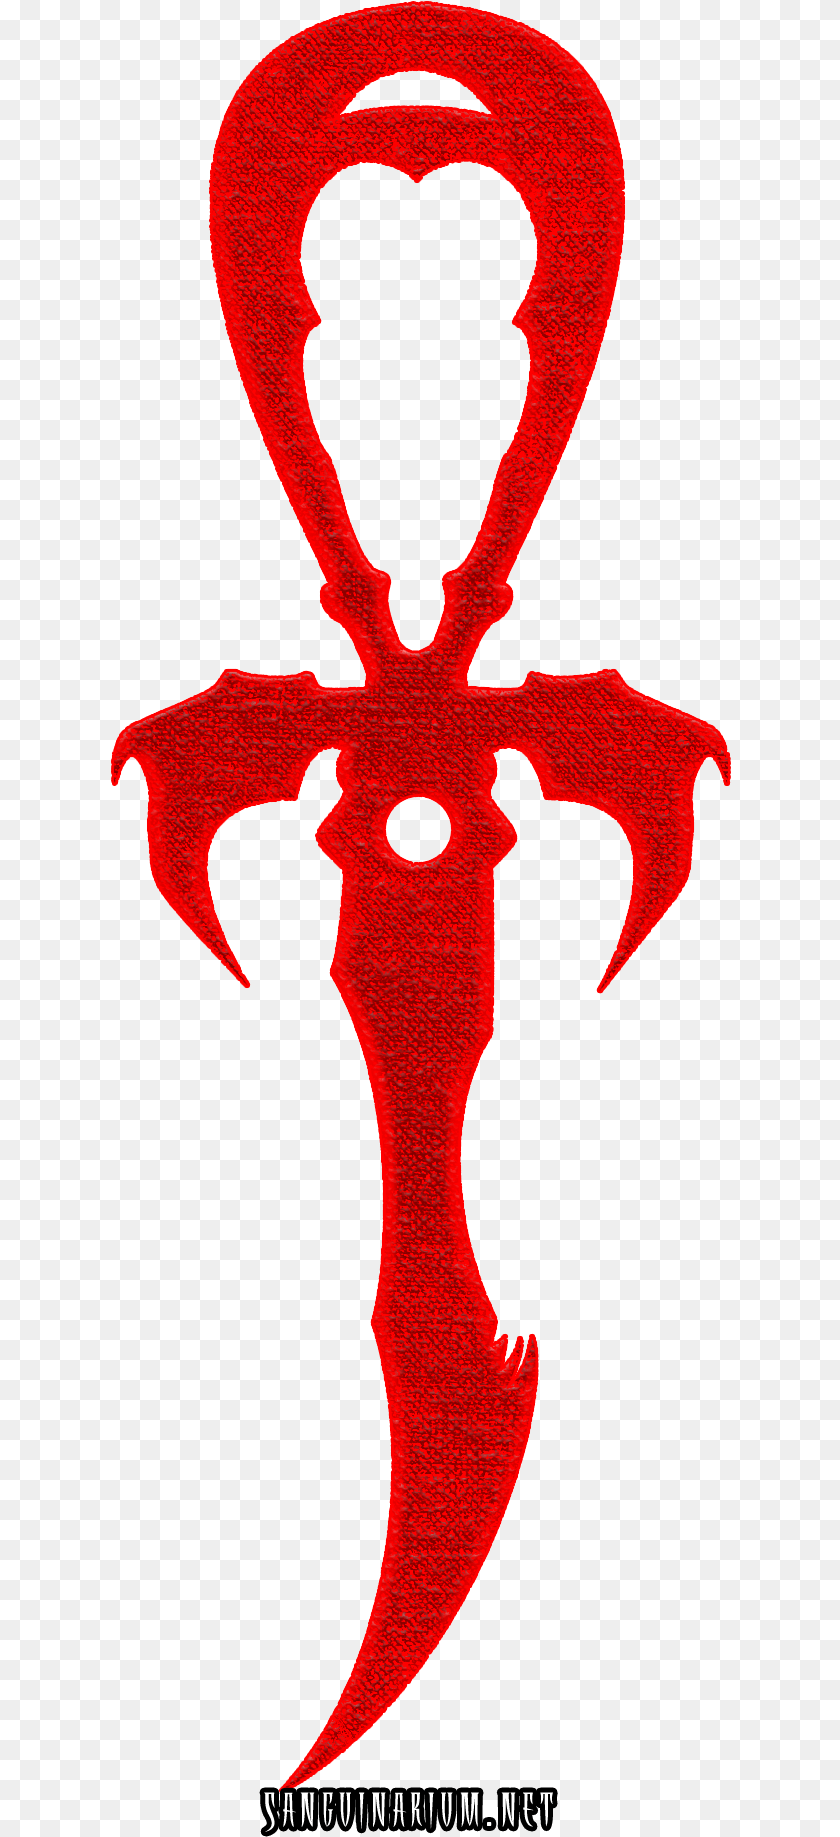 621x1837 The Red Legacy Ankh The Symbol Of The Vampire World Weapon, Blade, Dagger, Knife PNG